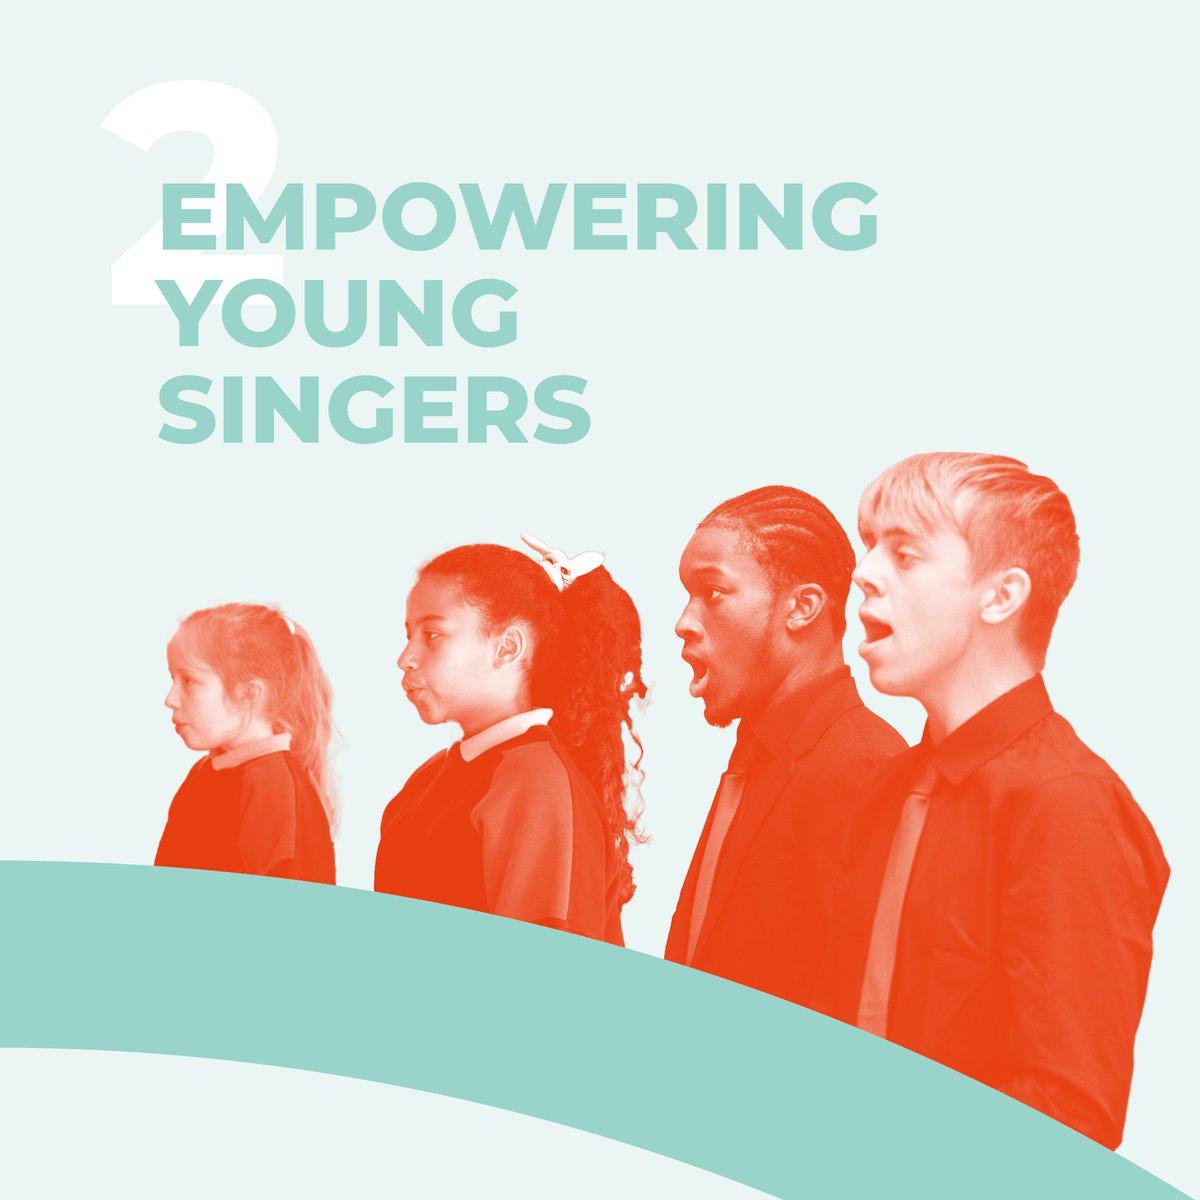 💫Empowering Young Singers 💫 Sing Ireland are dedicated to delivering Objective 2 of our New Strategy ✨ ☘️ Check out our new Strategy 20224-2029 here: eu1.hubs.ly/H08Rh3j0 #unitingourvoices #groupsinging #SingIreland #Objectiveone #strategicplan